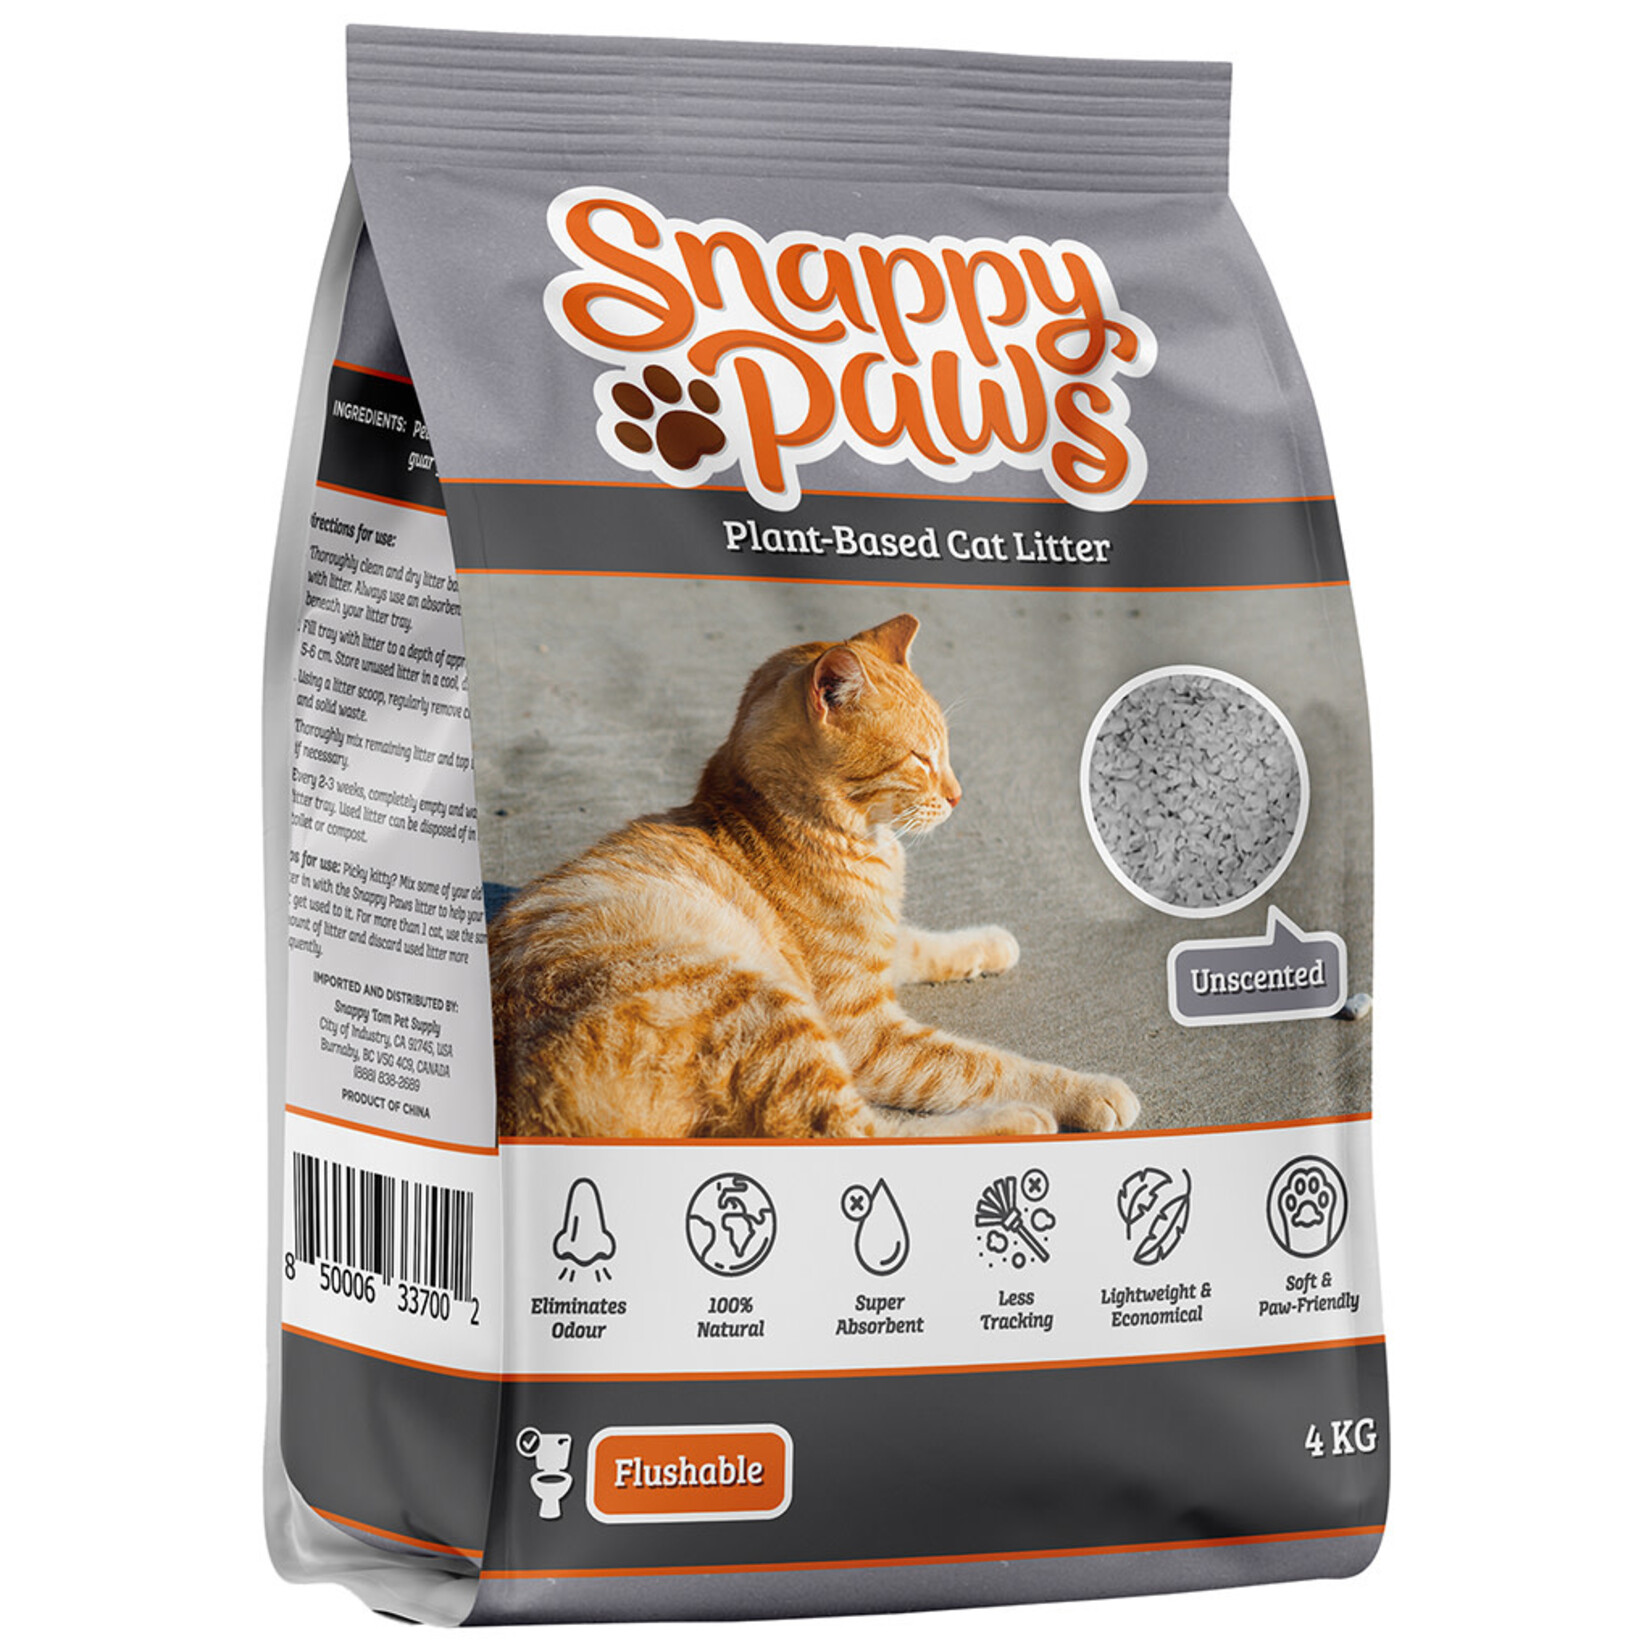 Snappy Tom Snappy Paws Unscented 8.8LB